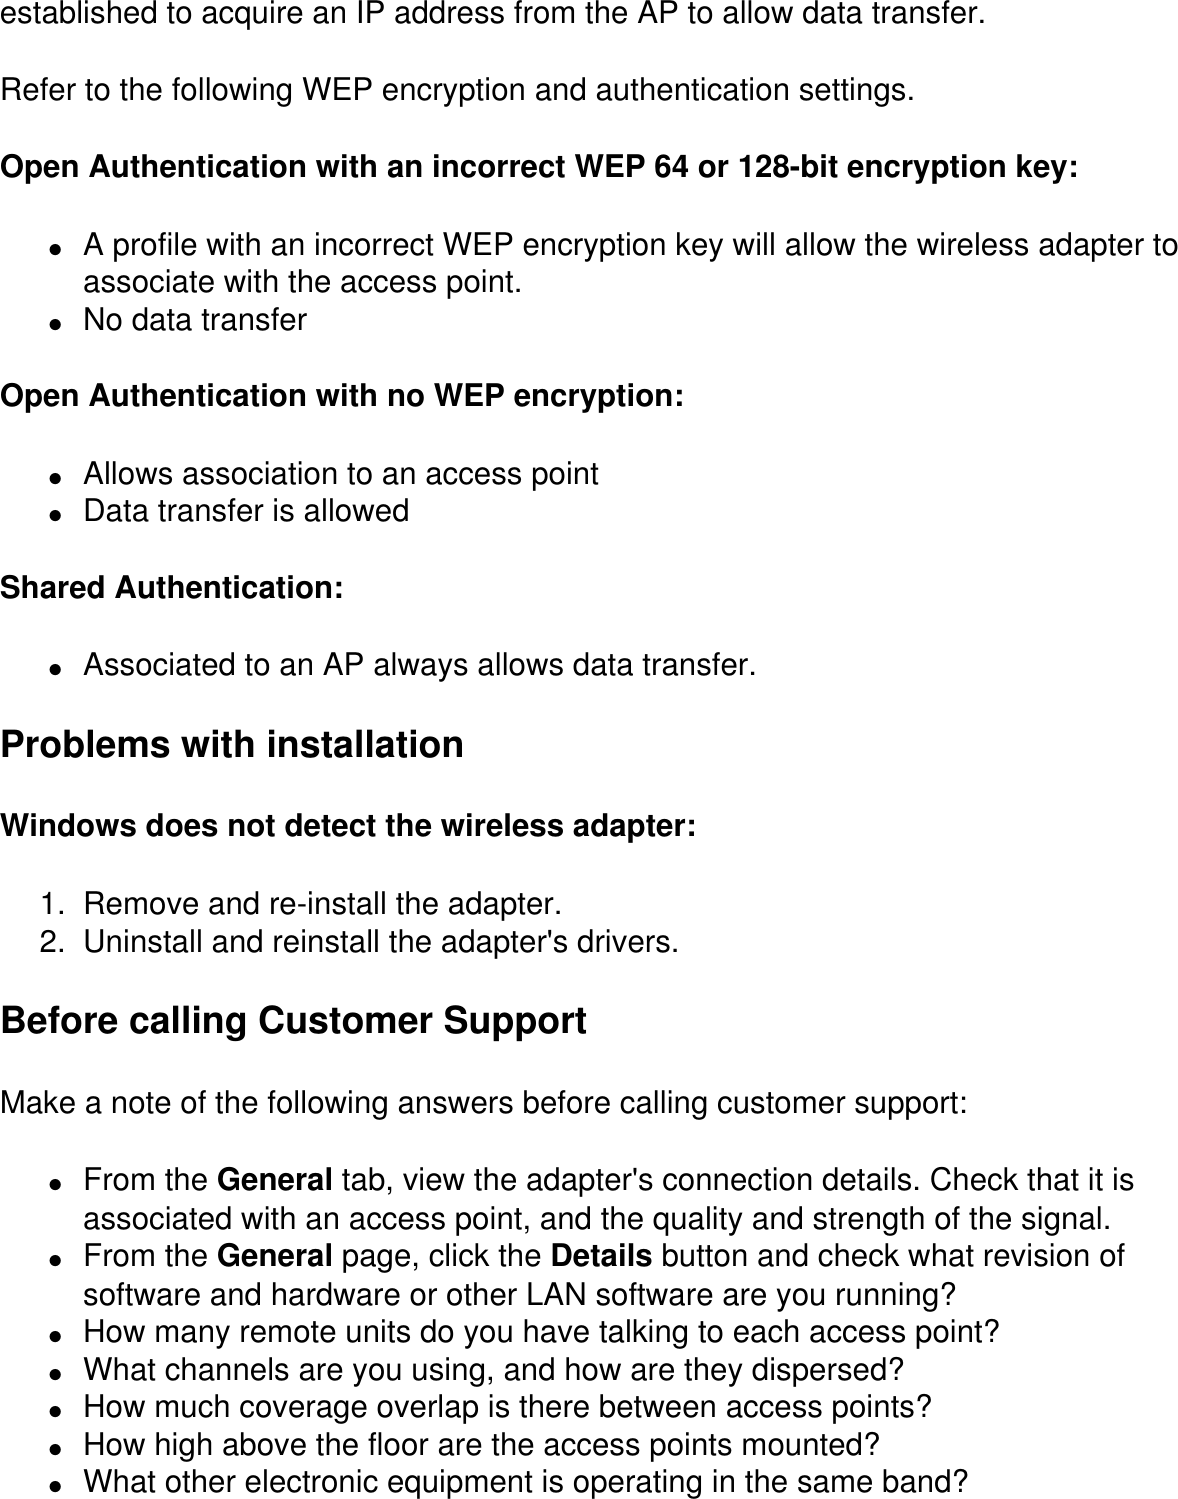 established to acquire an IP address from the AP to allow data transfer.Refer to the following WEP encryption and authentication settings.Open Authentication with an incorrect WEP 64 or 128-bit encryption key:●     A profile with an incorrect WEP encryption key will allow the wireless adapter to associate with the access point.●     No data transferOpen Authentication with no WEP encryption:●     Allows association to an access point●     Data transfer is allowedShared Authentication:●     Associated to an AP always allows data transfer.Problems with installationWindows does not detect the wireless adapter:1.  Remove and re-install the adapter.2.  Uninstall and reinstall the adapter&apos;s drivers.Before calling Customer SupportMake a note of the following answers before calling customer support:●     From the General tab, view the adapter&apos;s connection details. Check that it is associated with an access point, and the quality and strength of the signal.●     From the General page, click the Details button and check what revision of software and hardware or other LAN software are you running?●     How many remote units do you have talking to each access point?●     What channels are you using, and how are they dispersed?●     How much coverage overlap is there between access points?●     How high above the floor are the access points mounted?●     What other electronic equipment is operating in the same band?